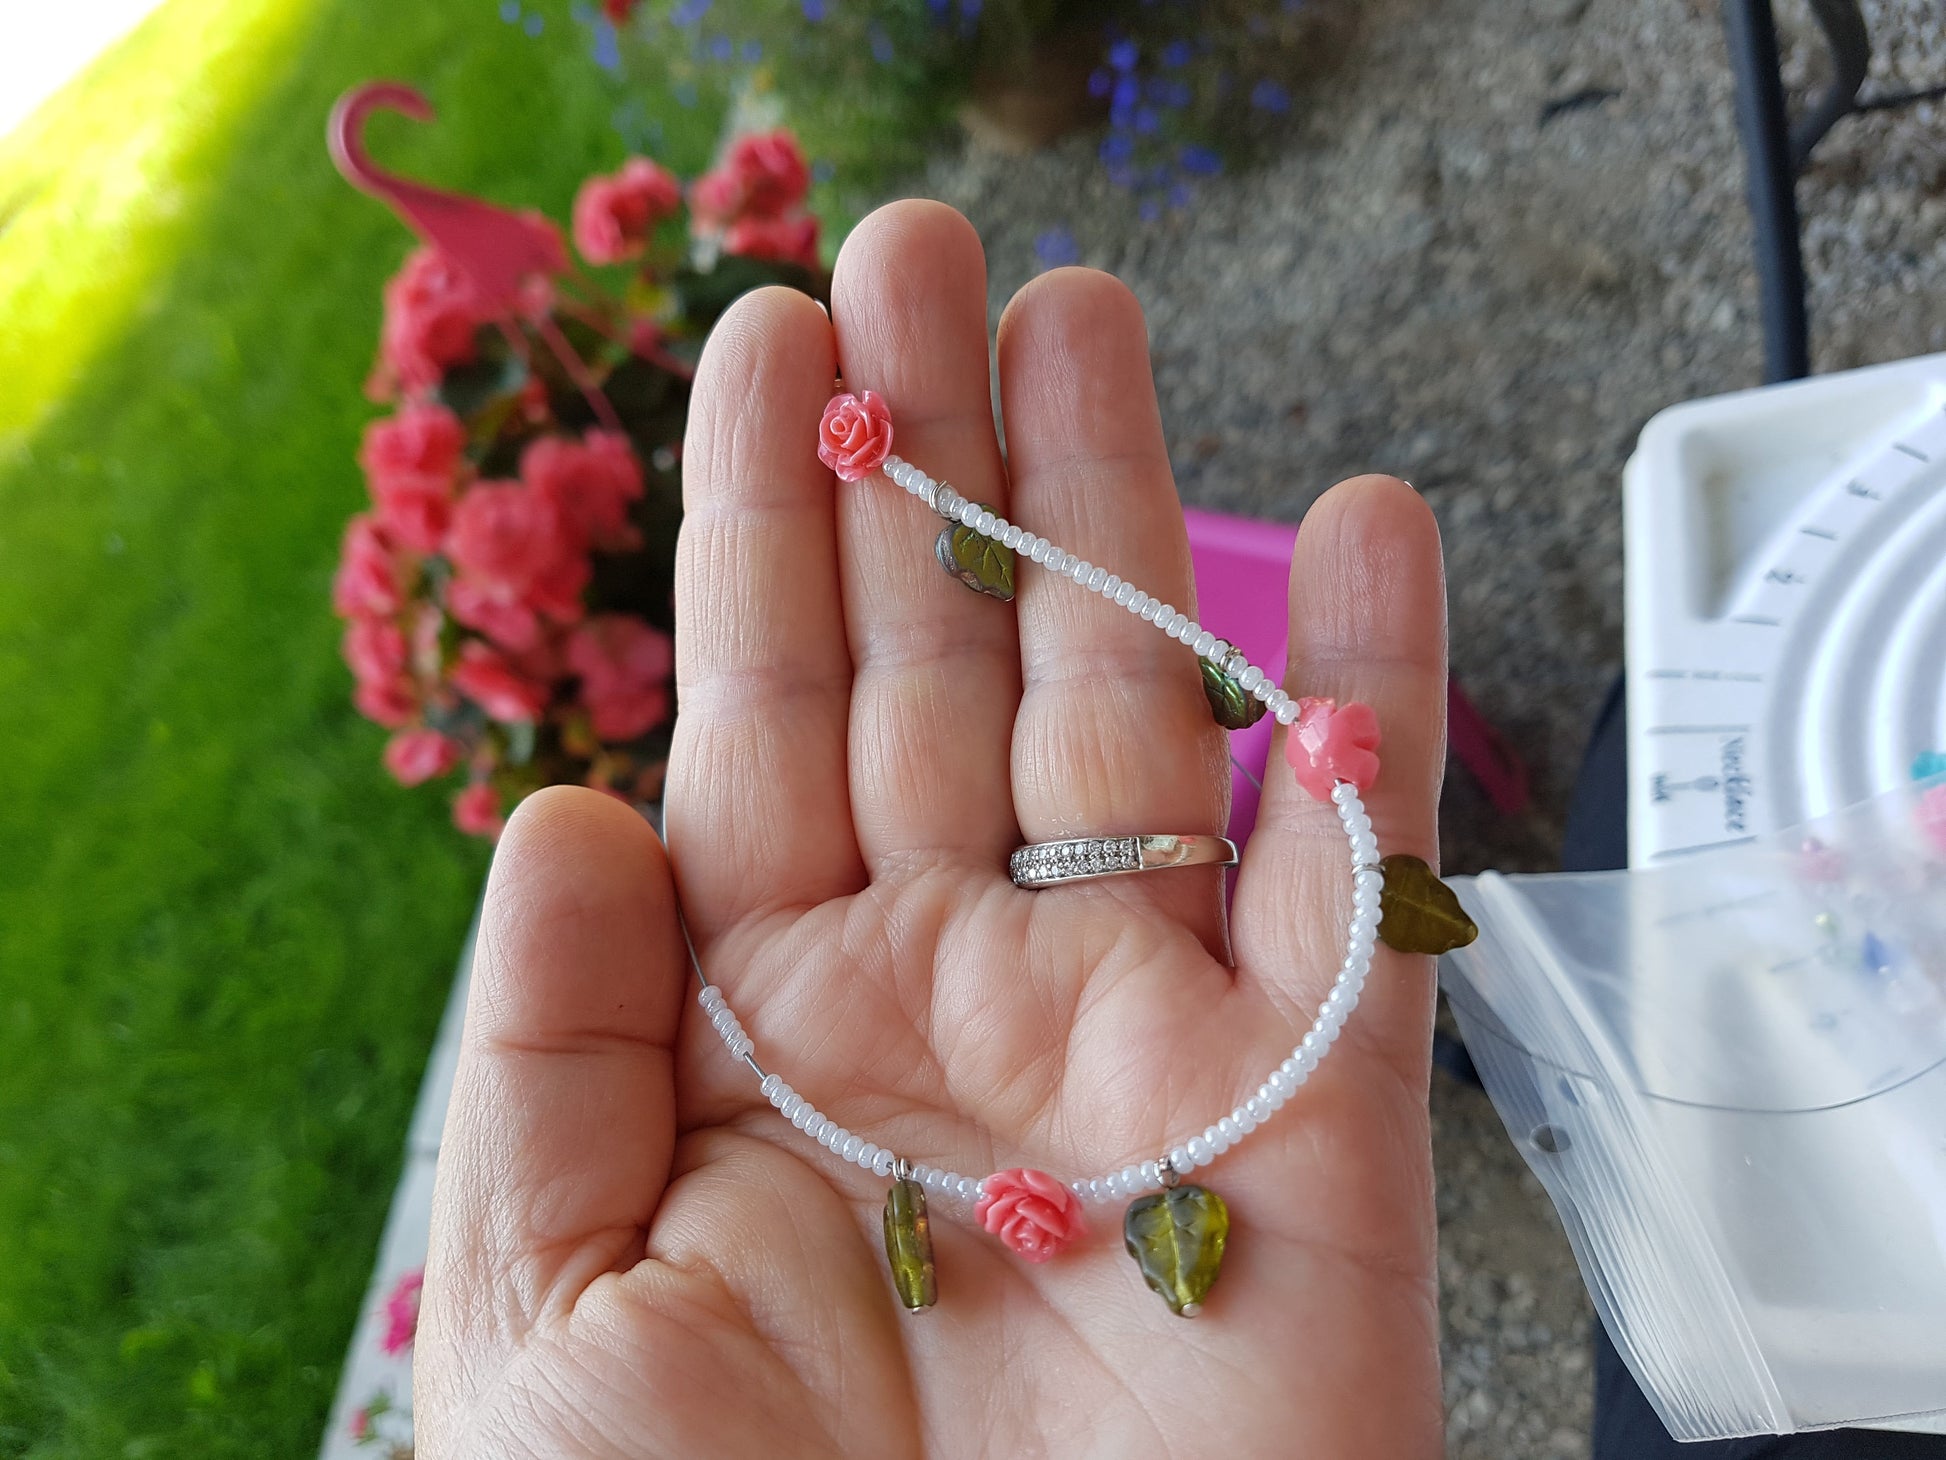 Rose Garden Anklet, Ankle Bracelet, Beaded Anklet with Pink Flowers, Green Leafs, pearlized white seed beads